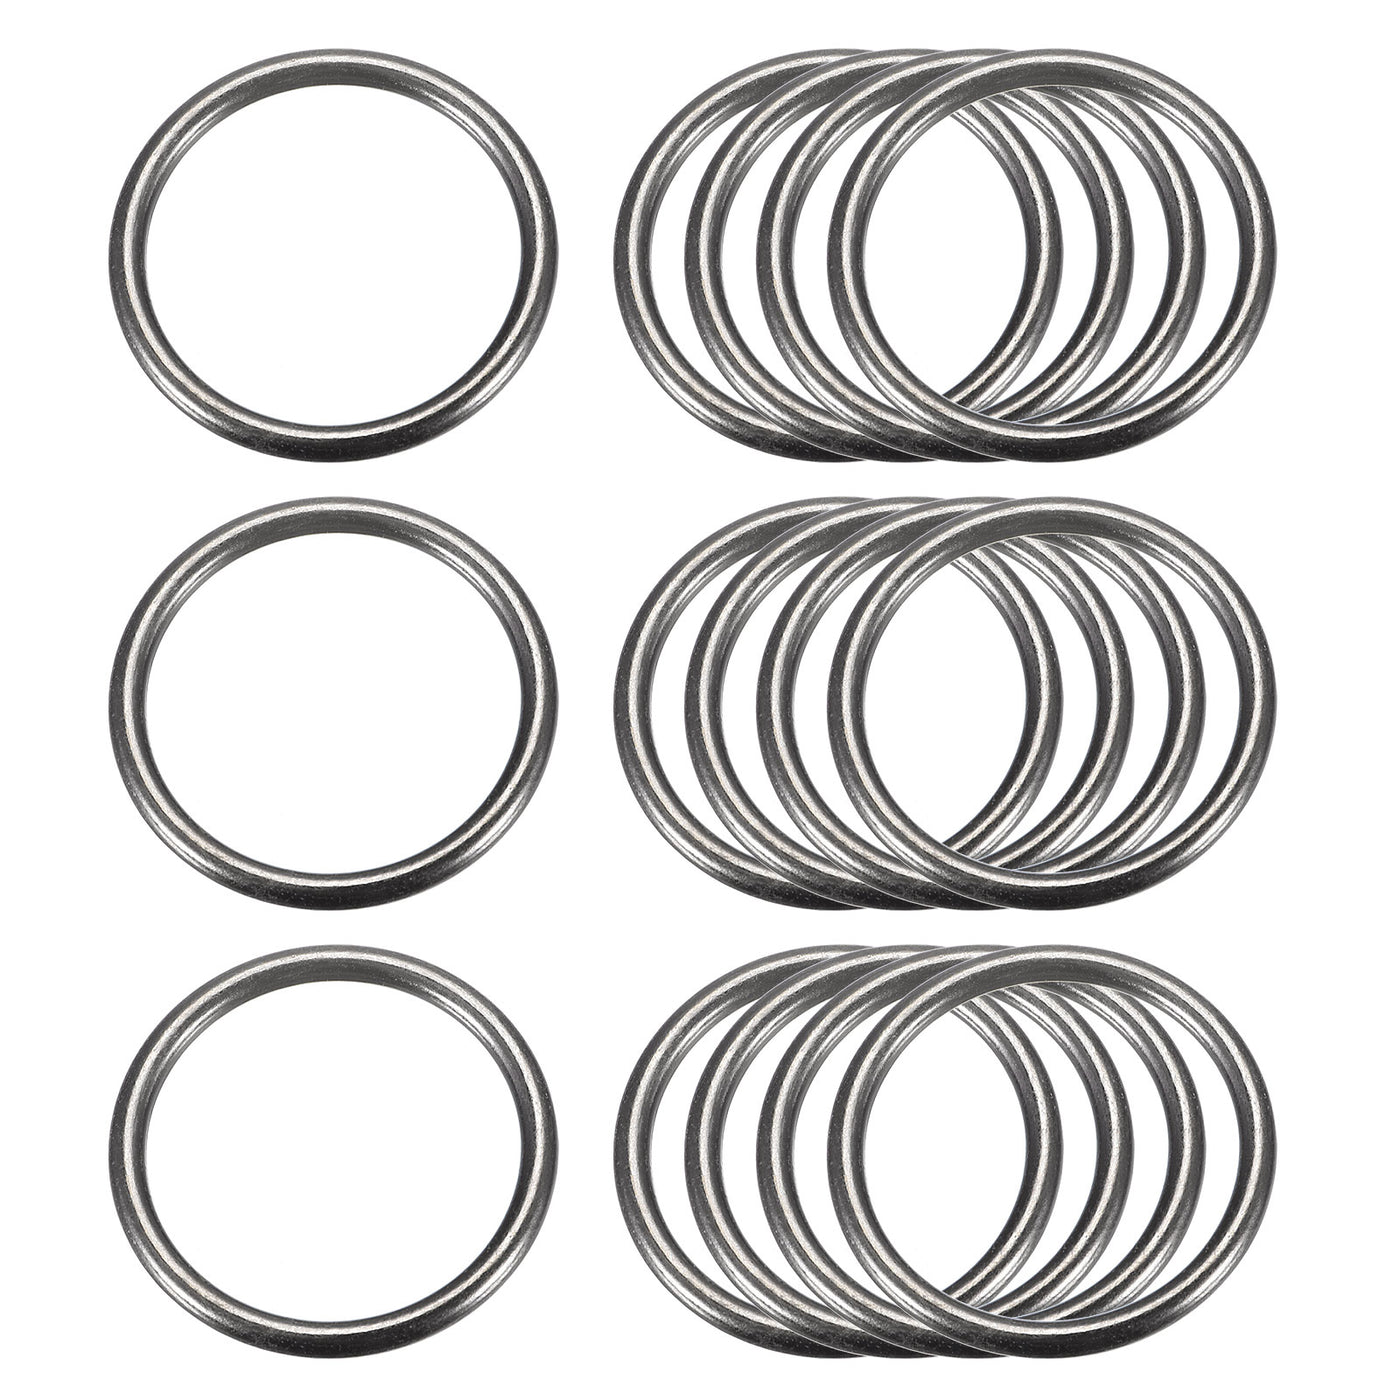 uxcell Uxcell Metal O Rings, 15pcs 30mm(1.18") ID 3mm Thick Welded O-Ringe, Dark Gray